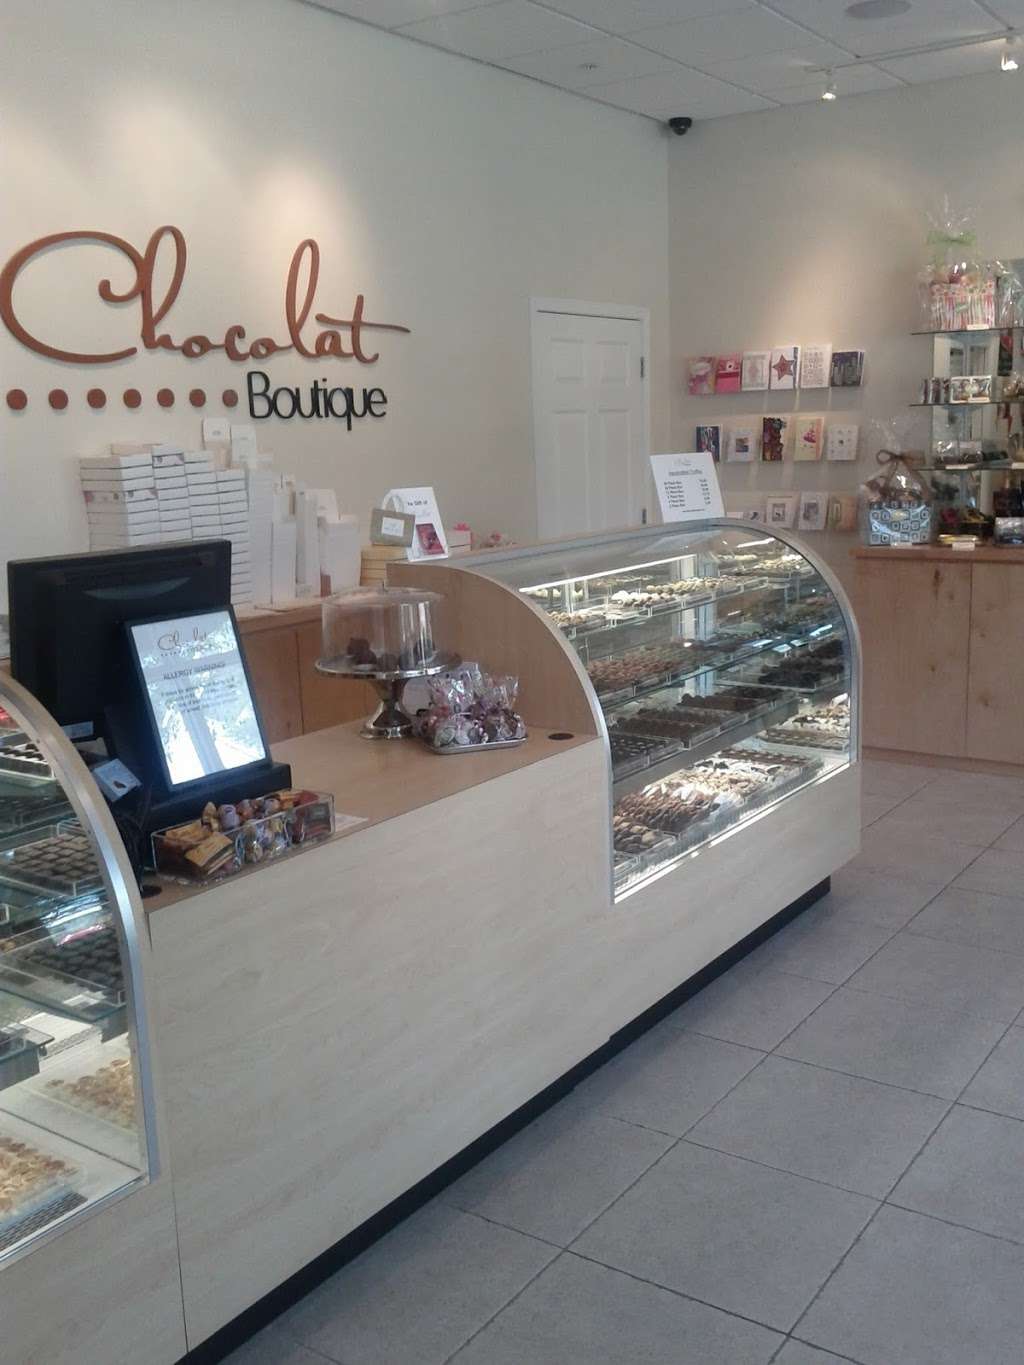 Chocolat Boutique | 6537, 1012 Market St, Fort Mill, SC 29708, USA | Phone: (803) 802-9980